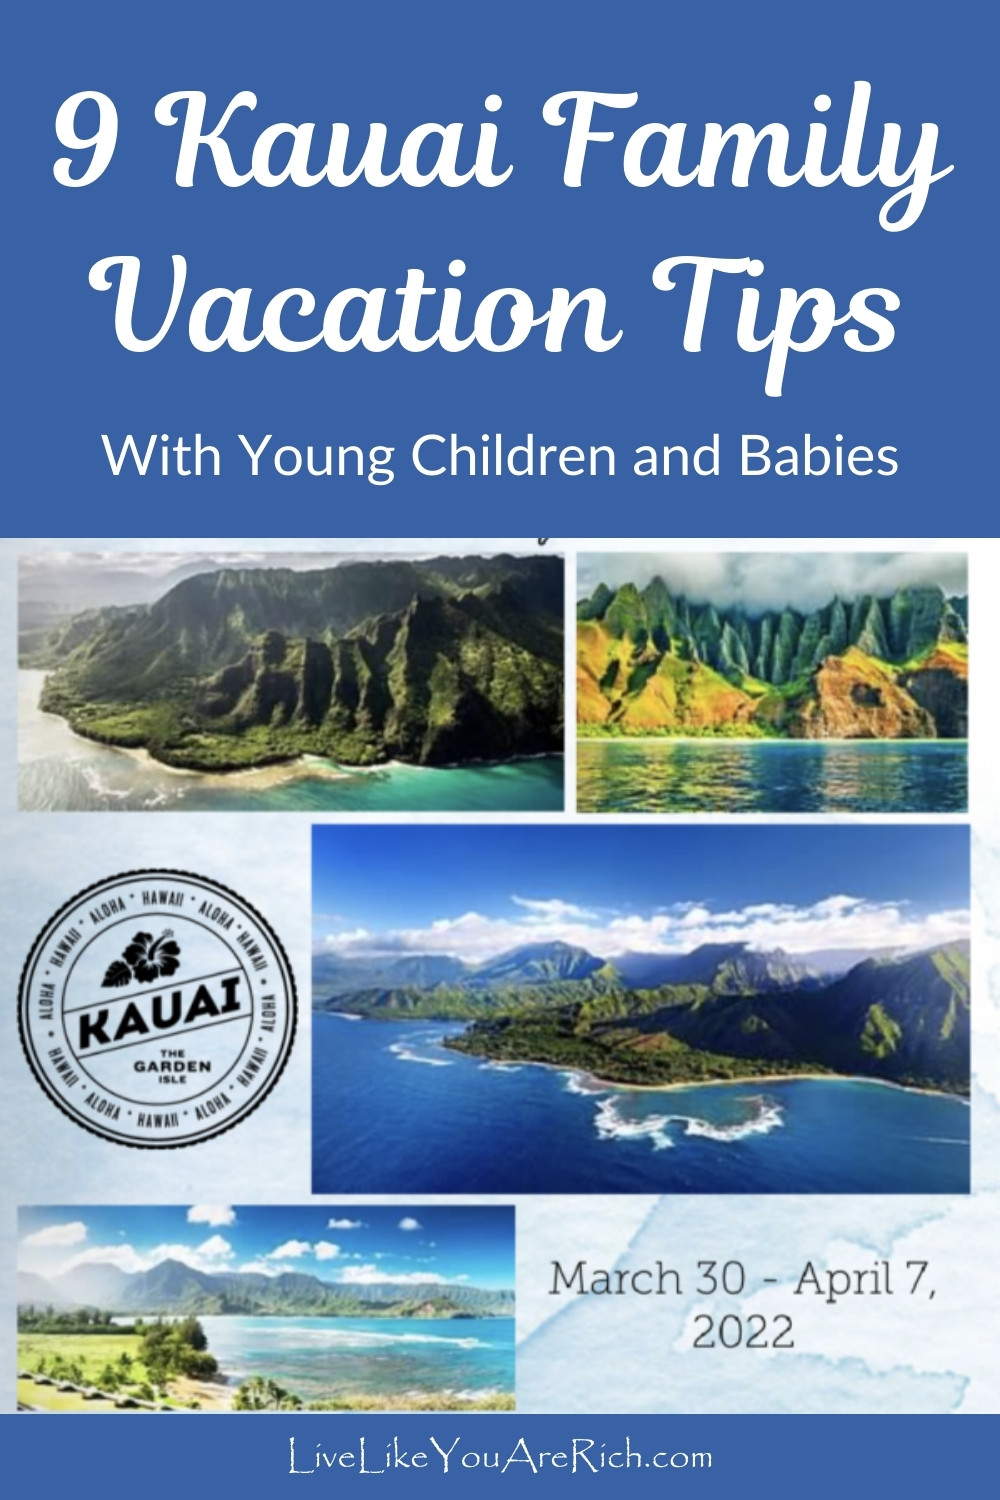 9 Kauai Family Vacation Tips with Young Children and Babies